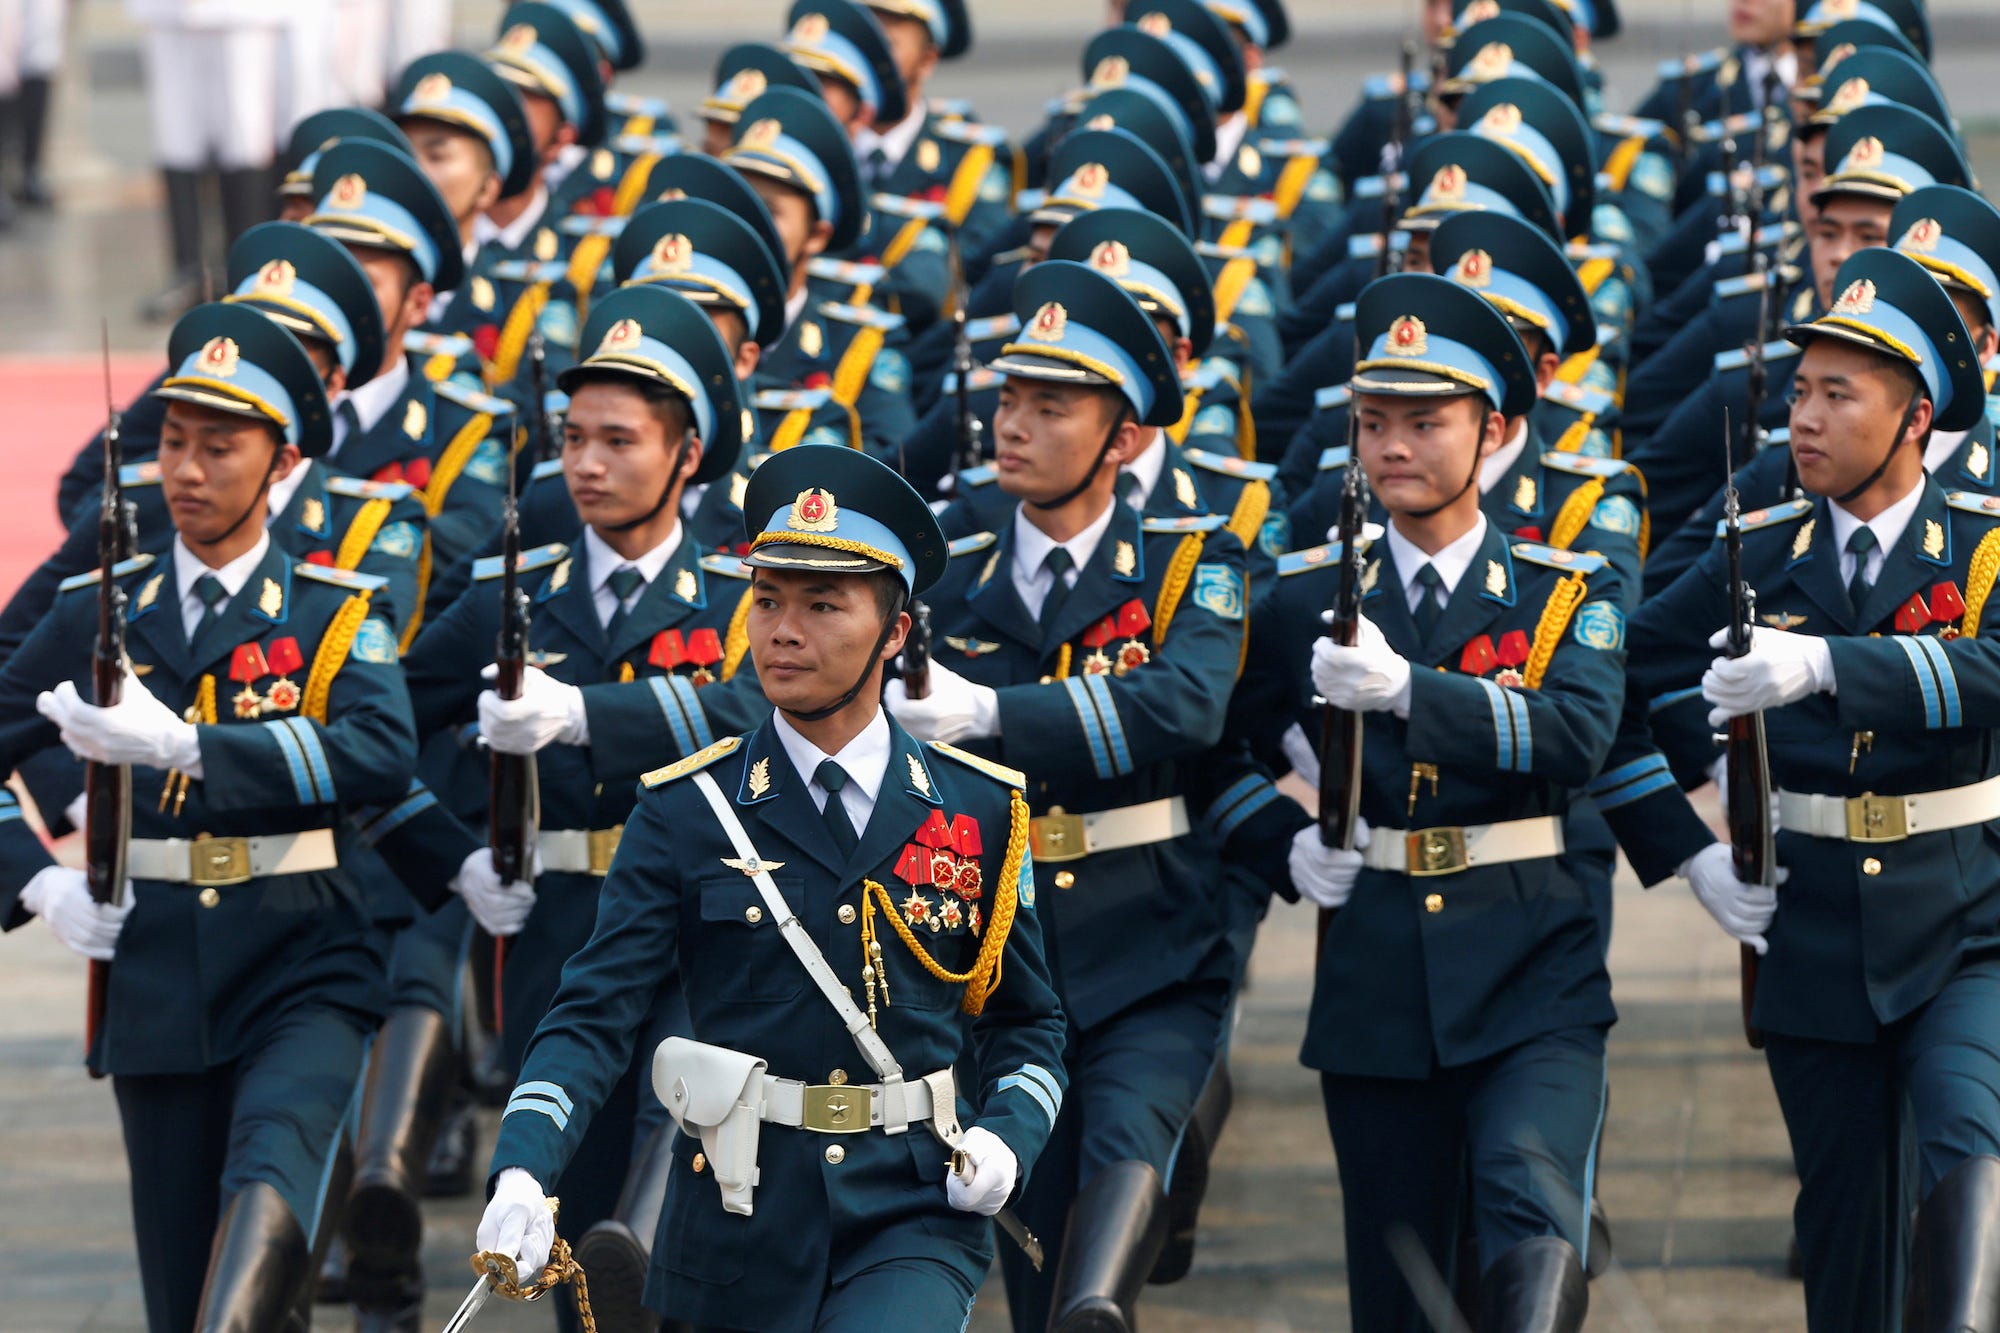 Vietnamese soldiers march during a welcoming ceremony for South Korean President Moon Jae-in at the Presidential Palace in Hanoi, Vietnam in March 2018.